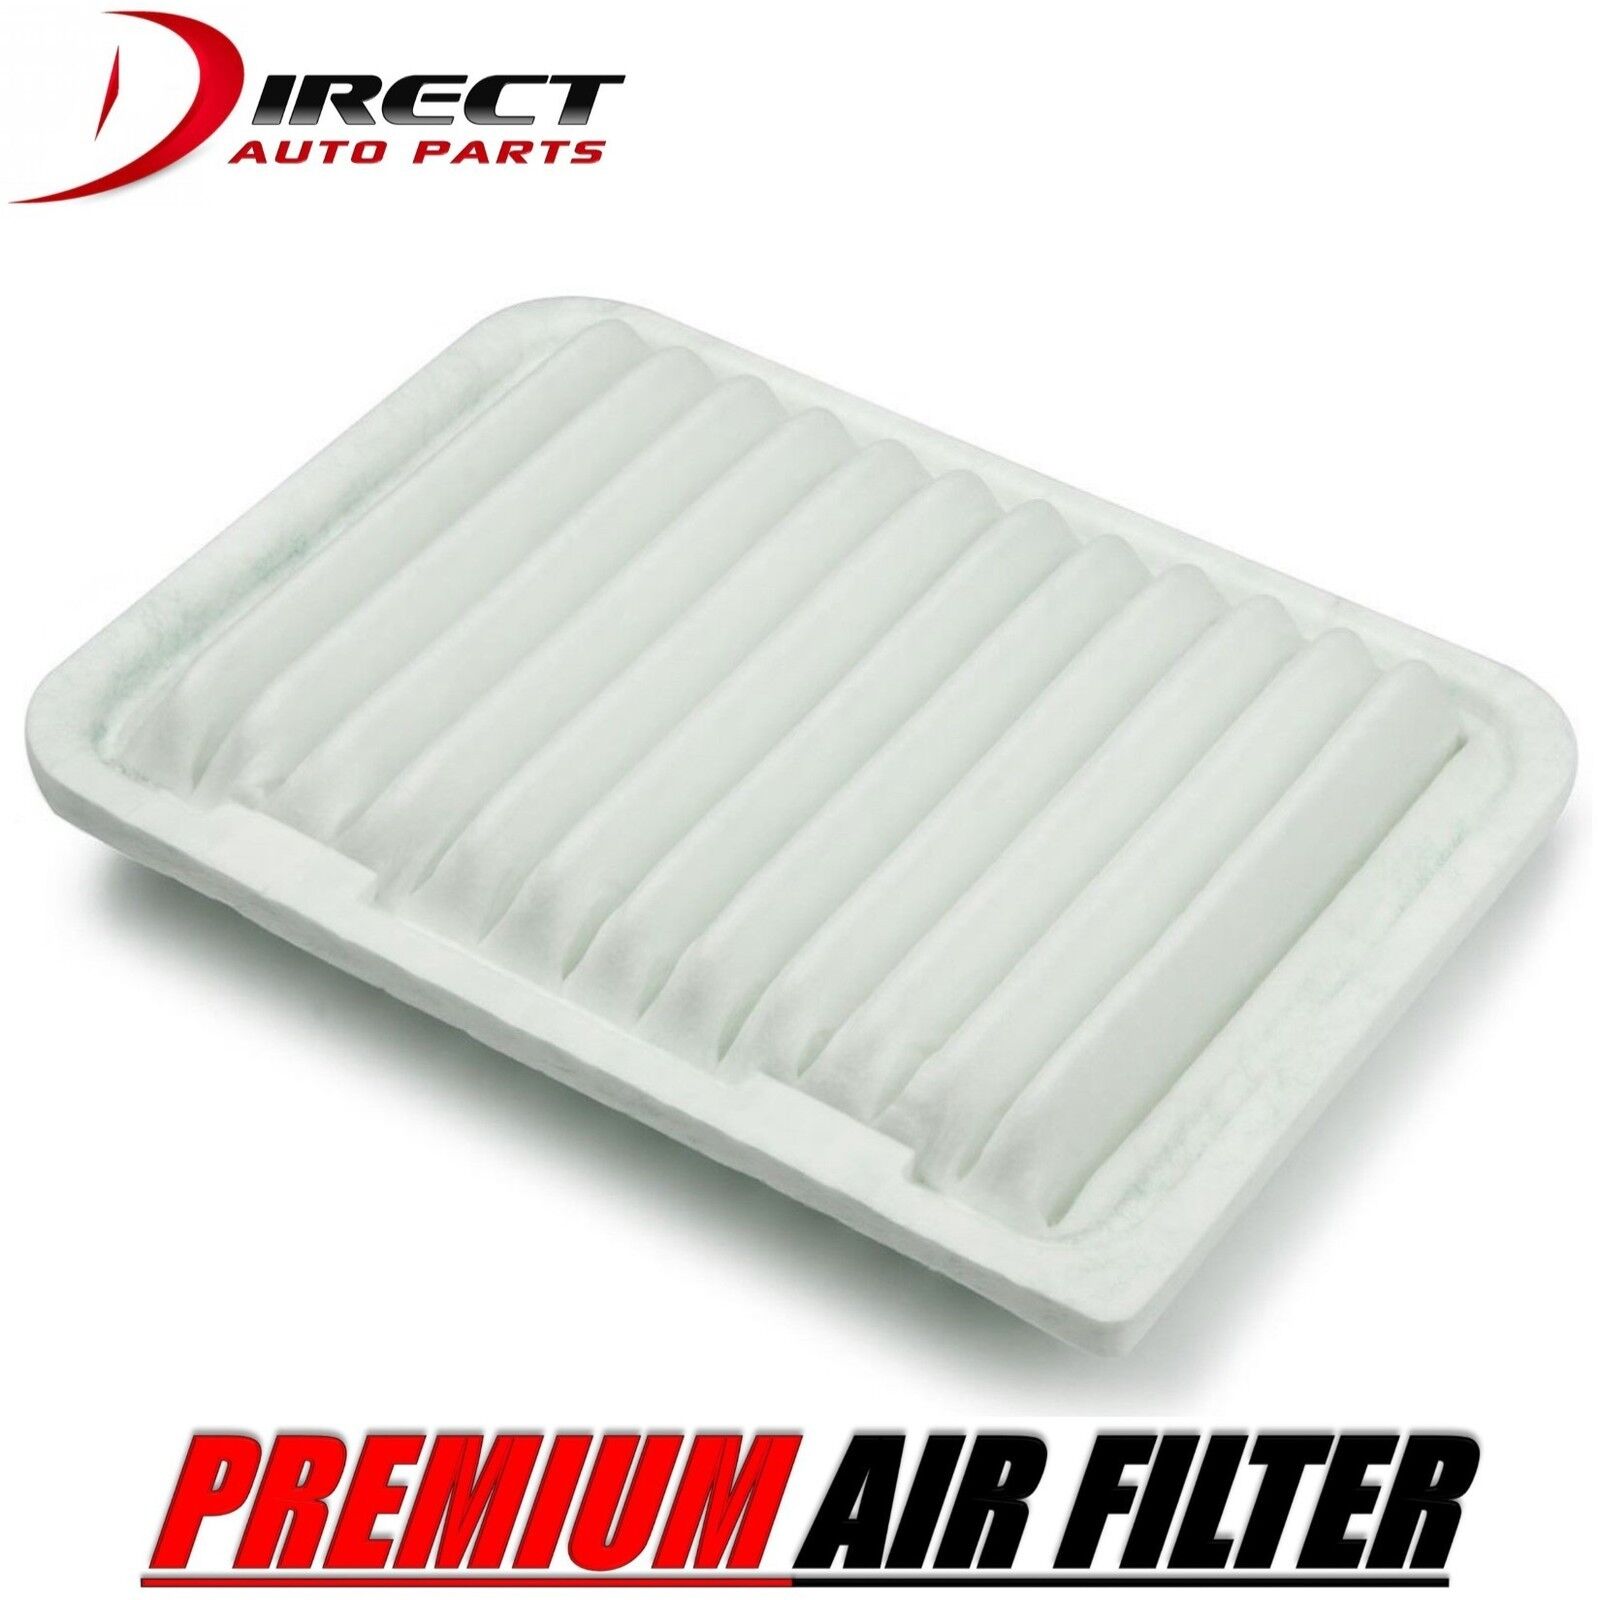 AIR FILTER FOR TOYOTA CAMRY 2.5L ENGINE 2010 - 2016